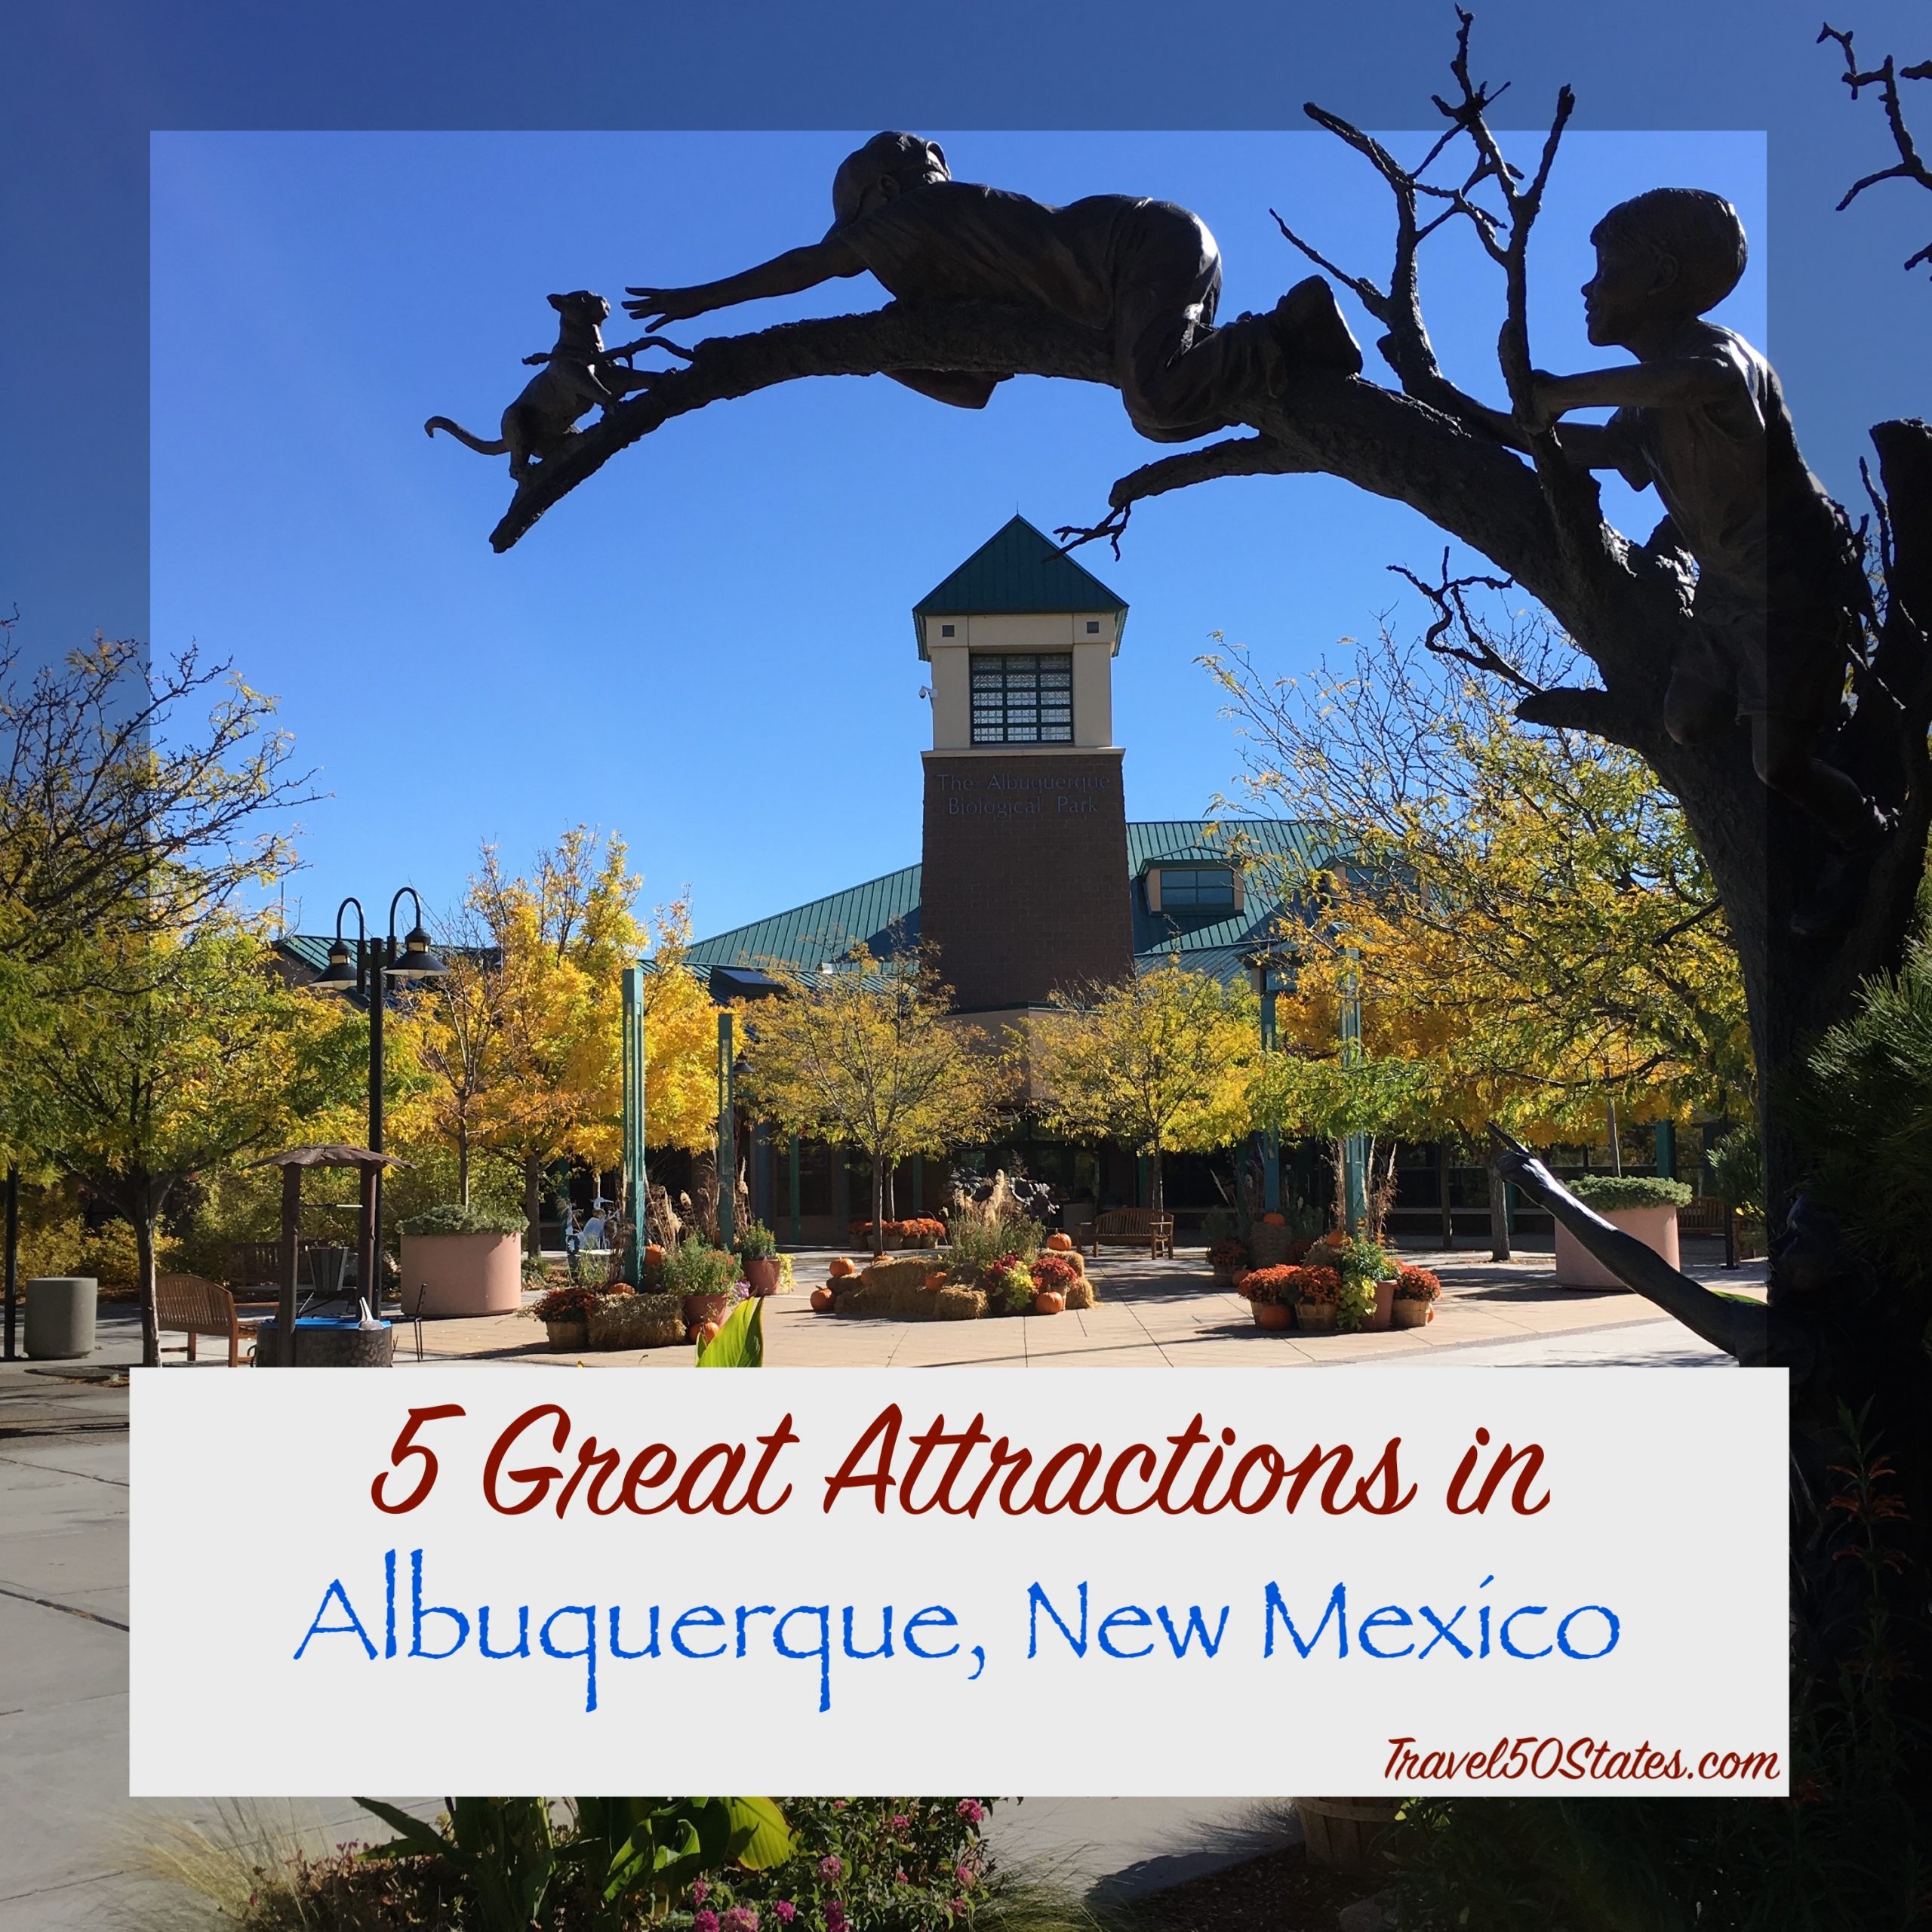 Five Great Attractions in Albuquerque, New Mexico